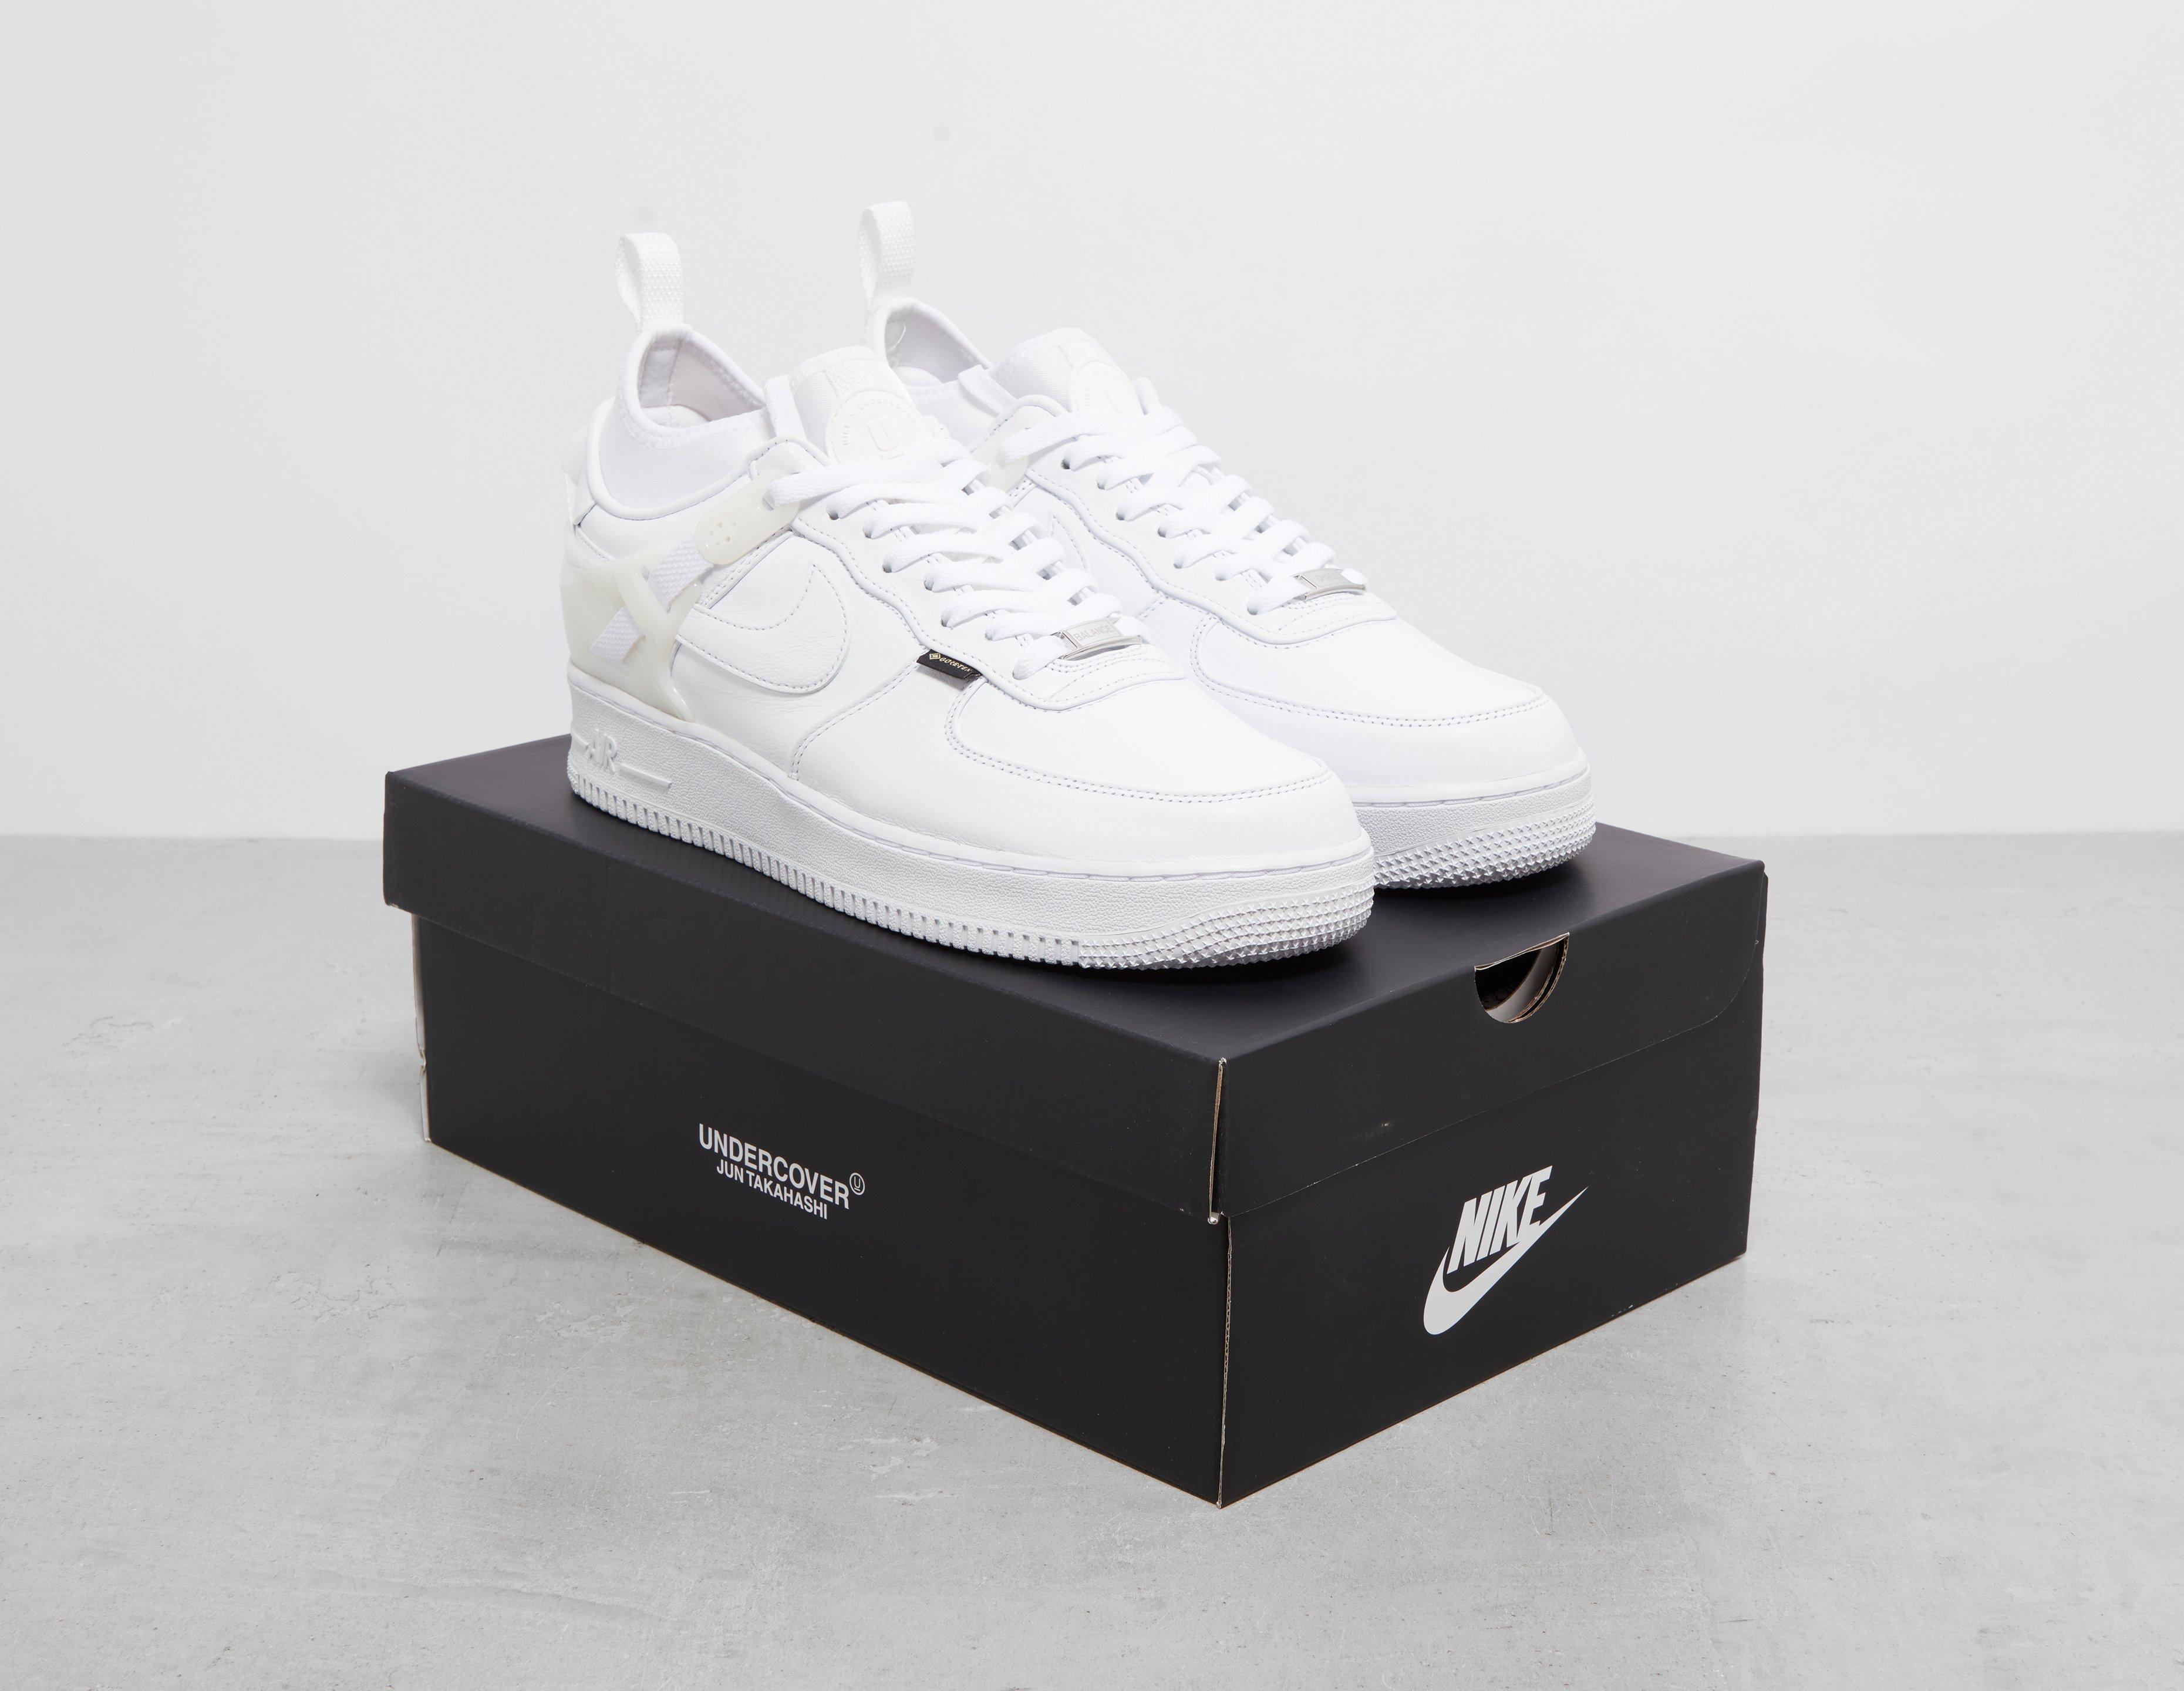 Nike x UNDERCOVER Air Force 1 Low GORE-TEX UK9